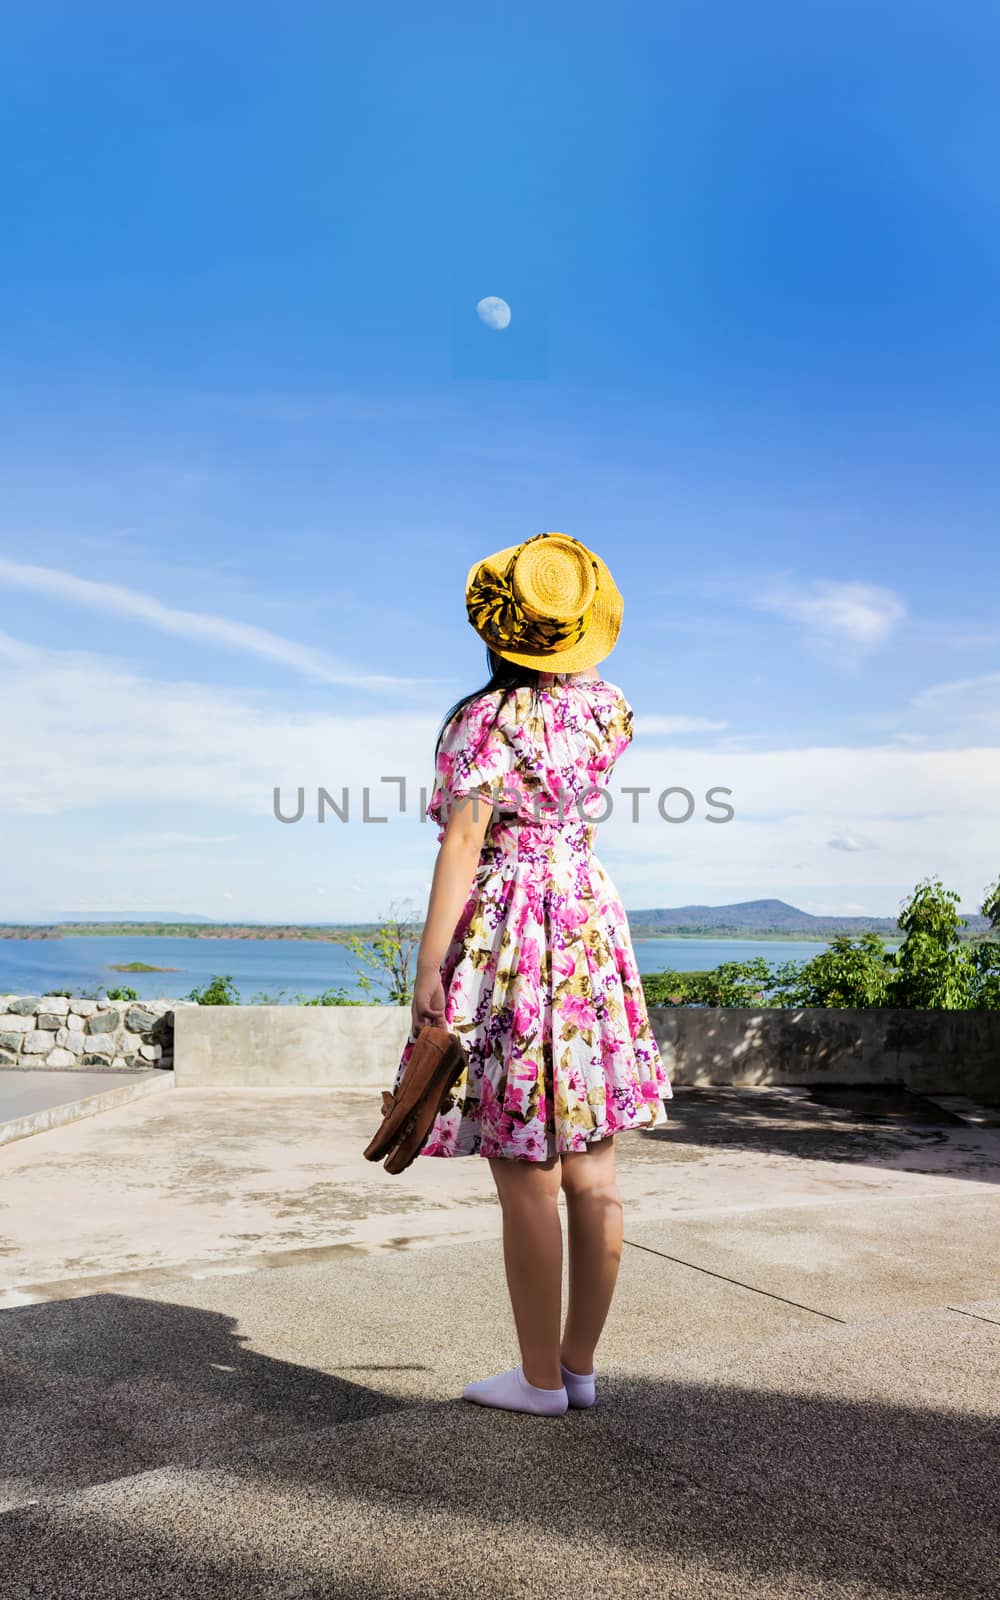 Women back or rare view standing and hold shoes look up to blue sky with little white moon, women or girl in summer flowers pattern dress with hat relax at reservoir or lake view background